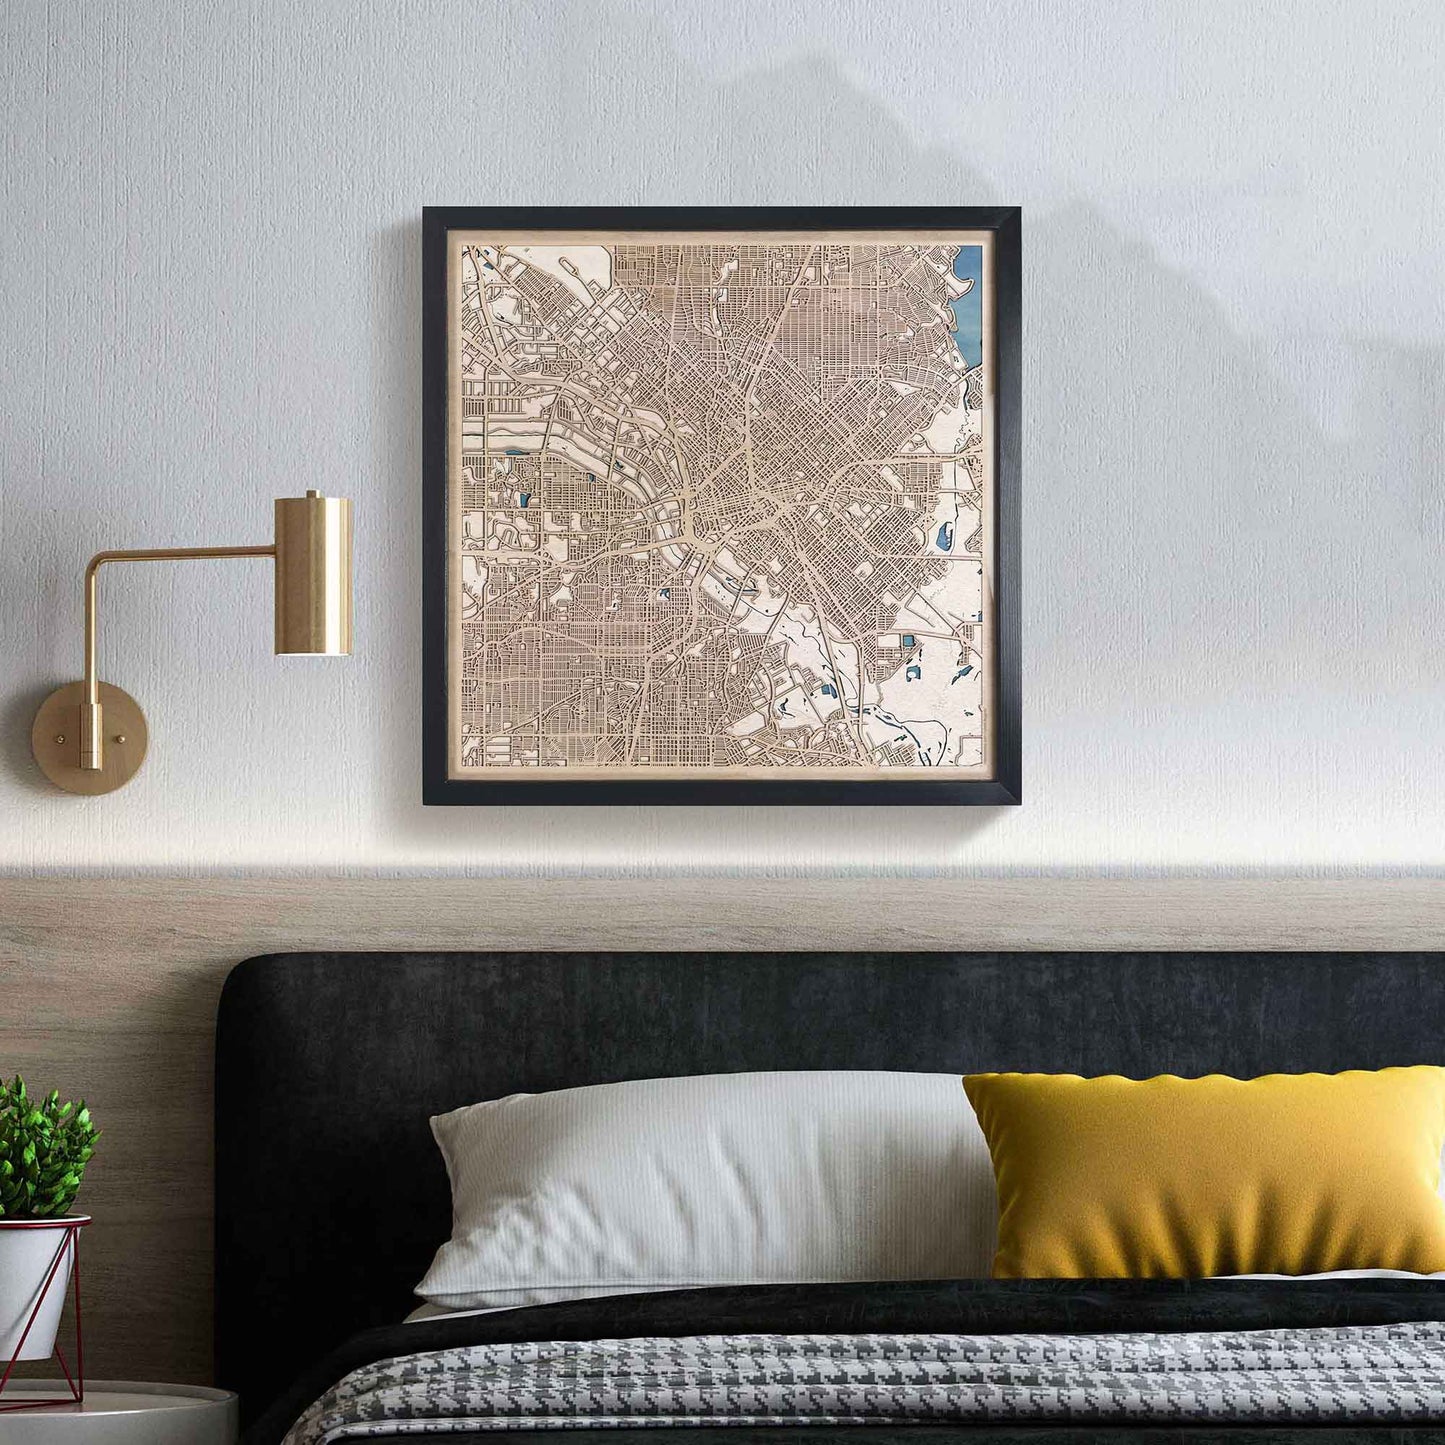 Dallas Wooden Map by CityWood - Custom Wood Map Art - Unique Laser Cut Engraved - Anniversary Gift